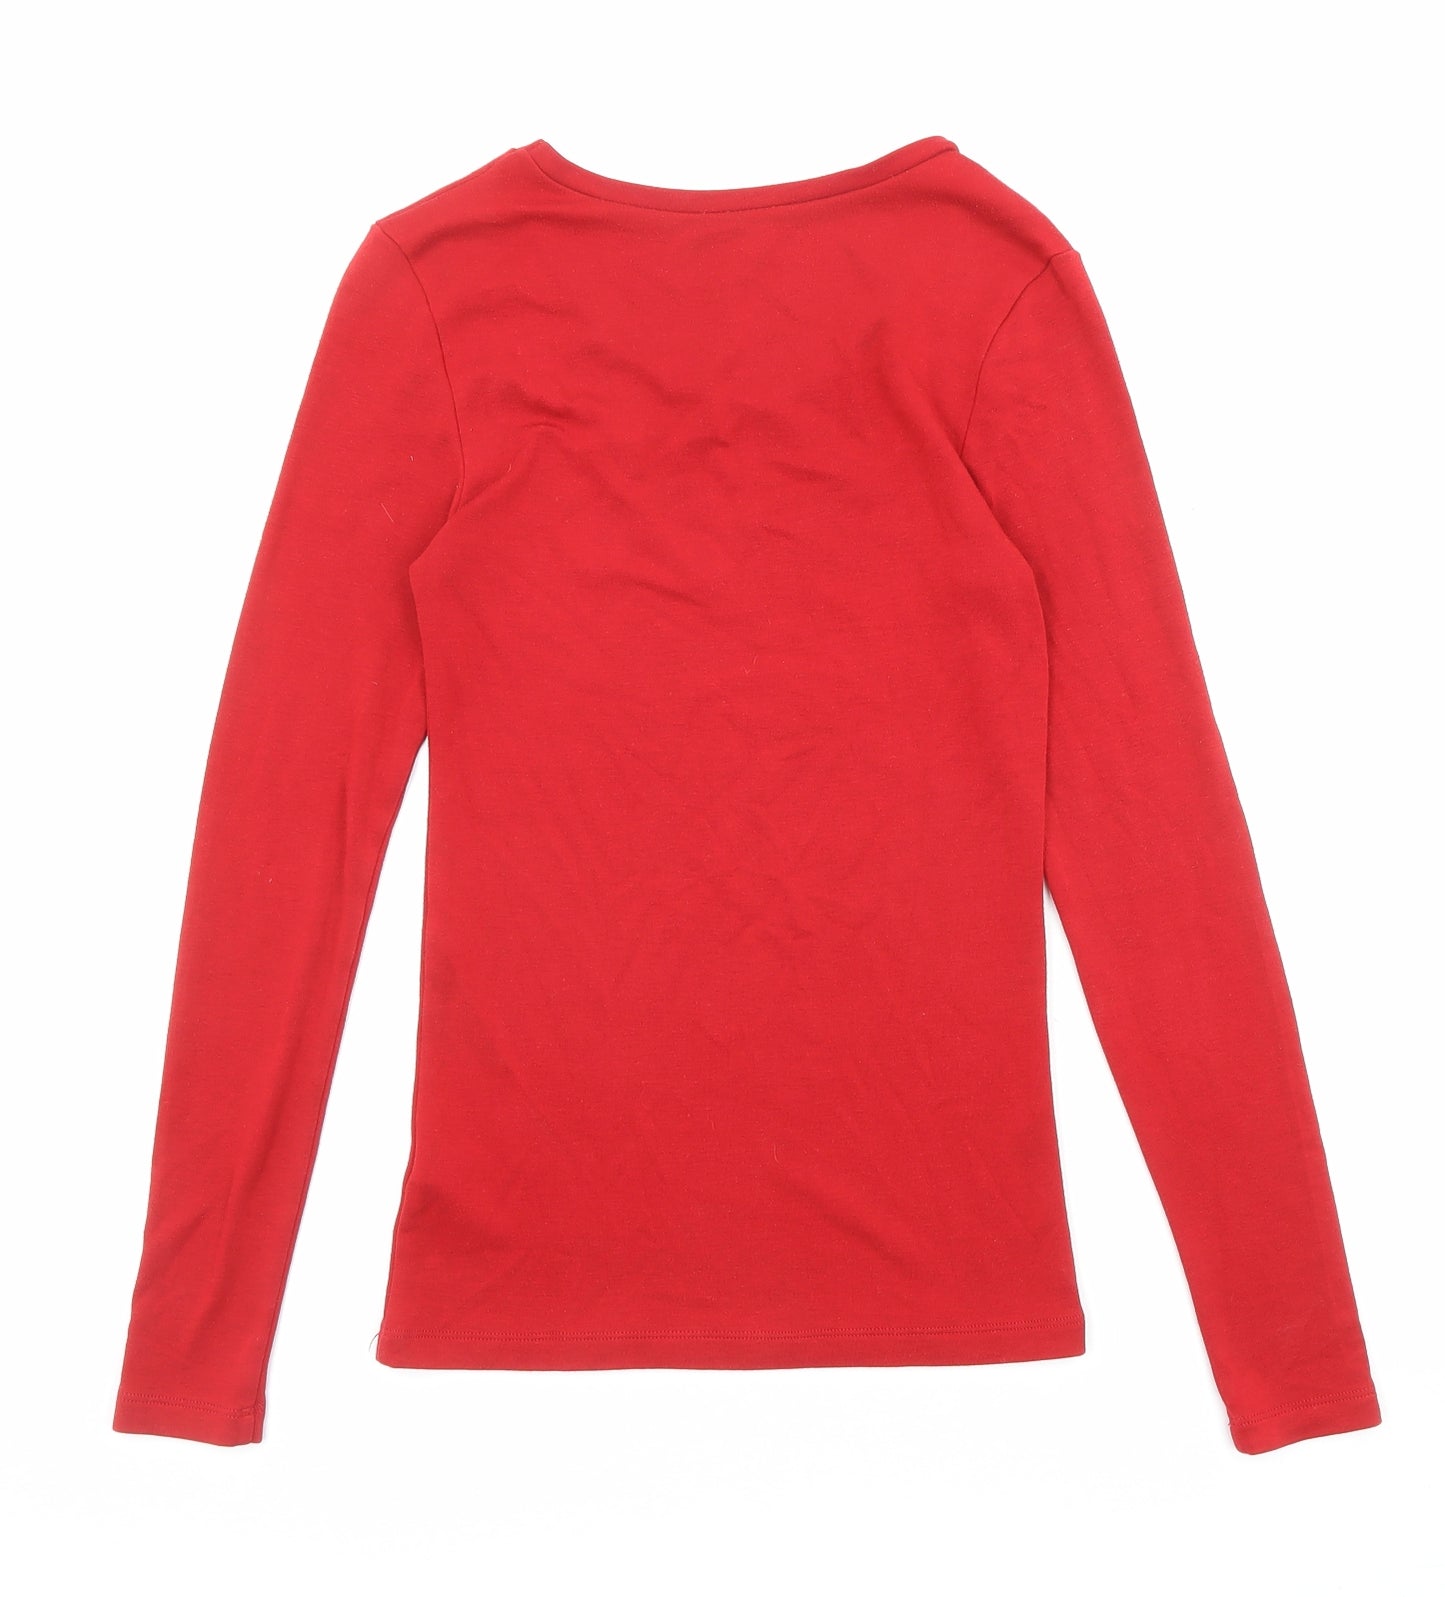 Marks and Spencer Womens Red Acrylic Basic T-Shirt Size 10 Round Neck